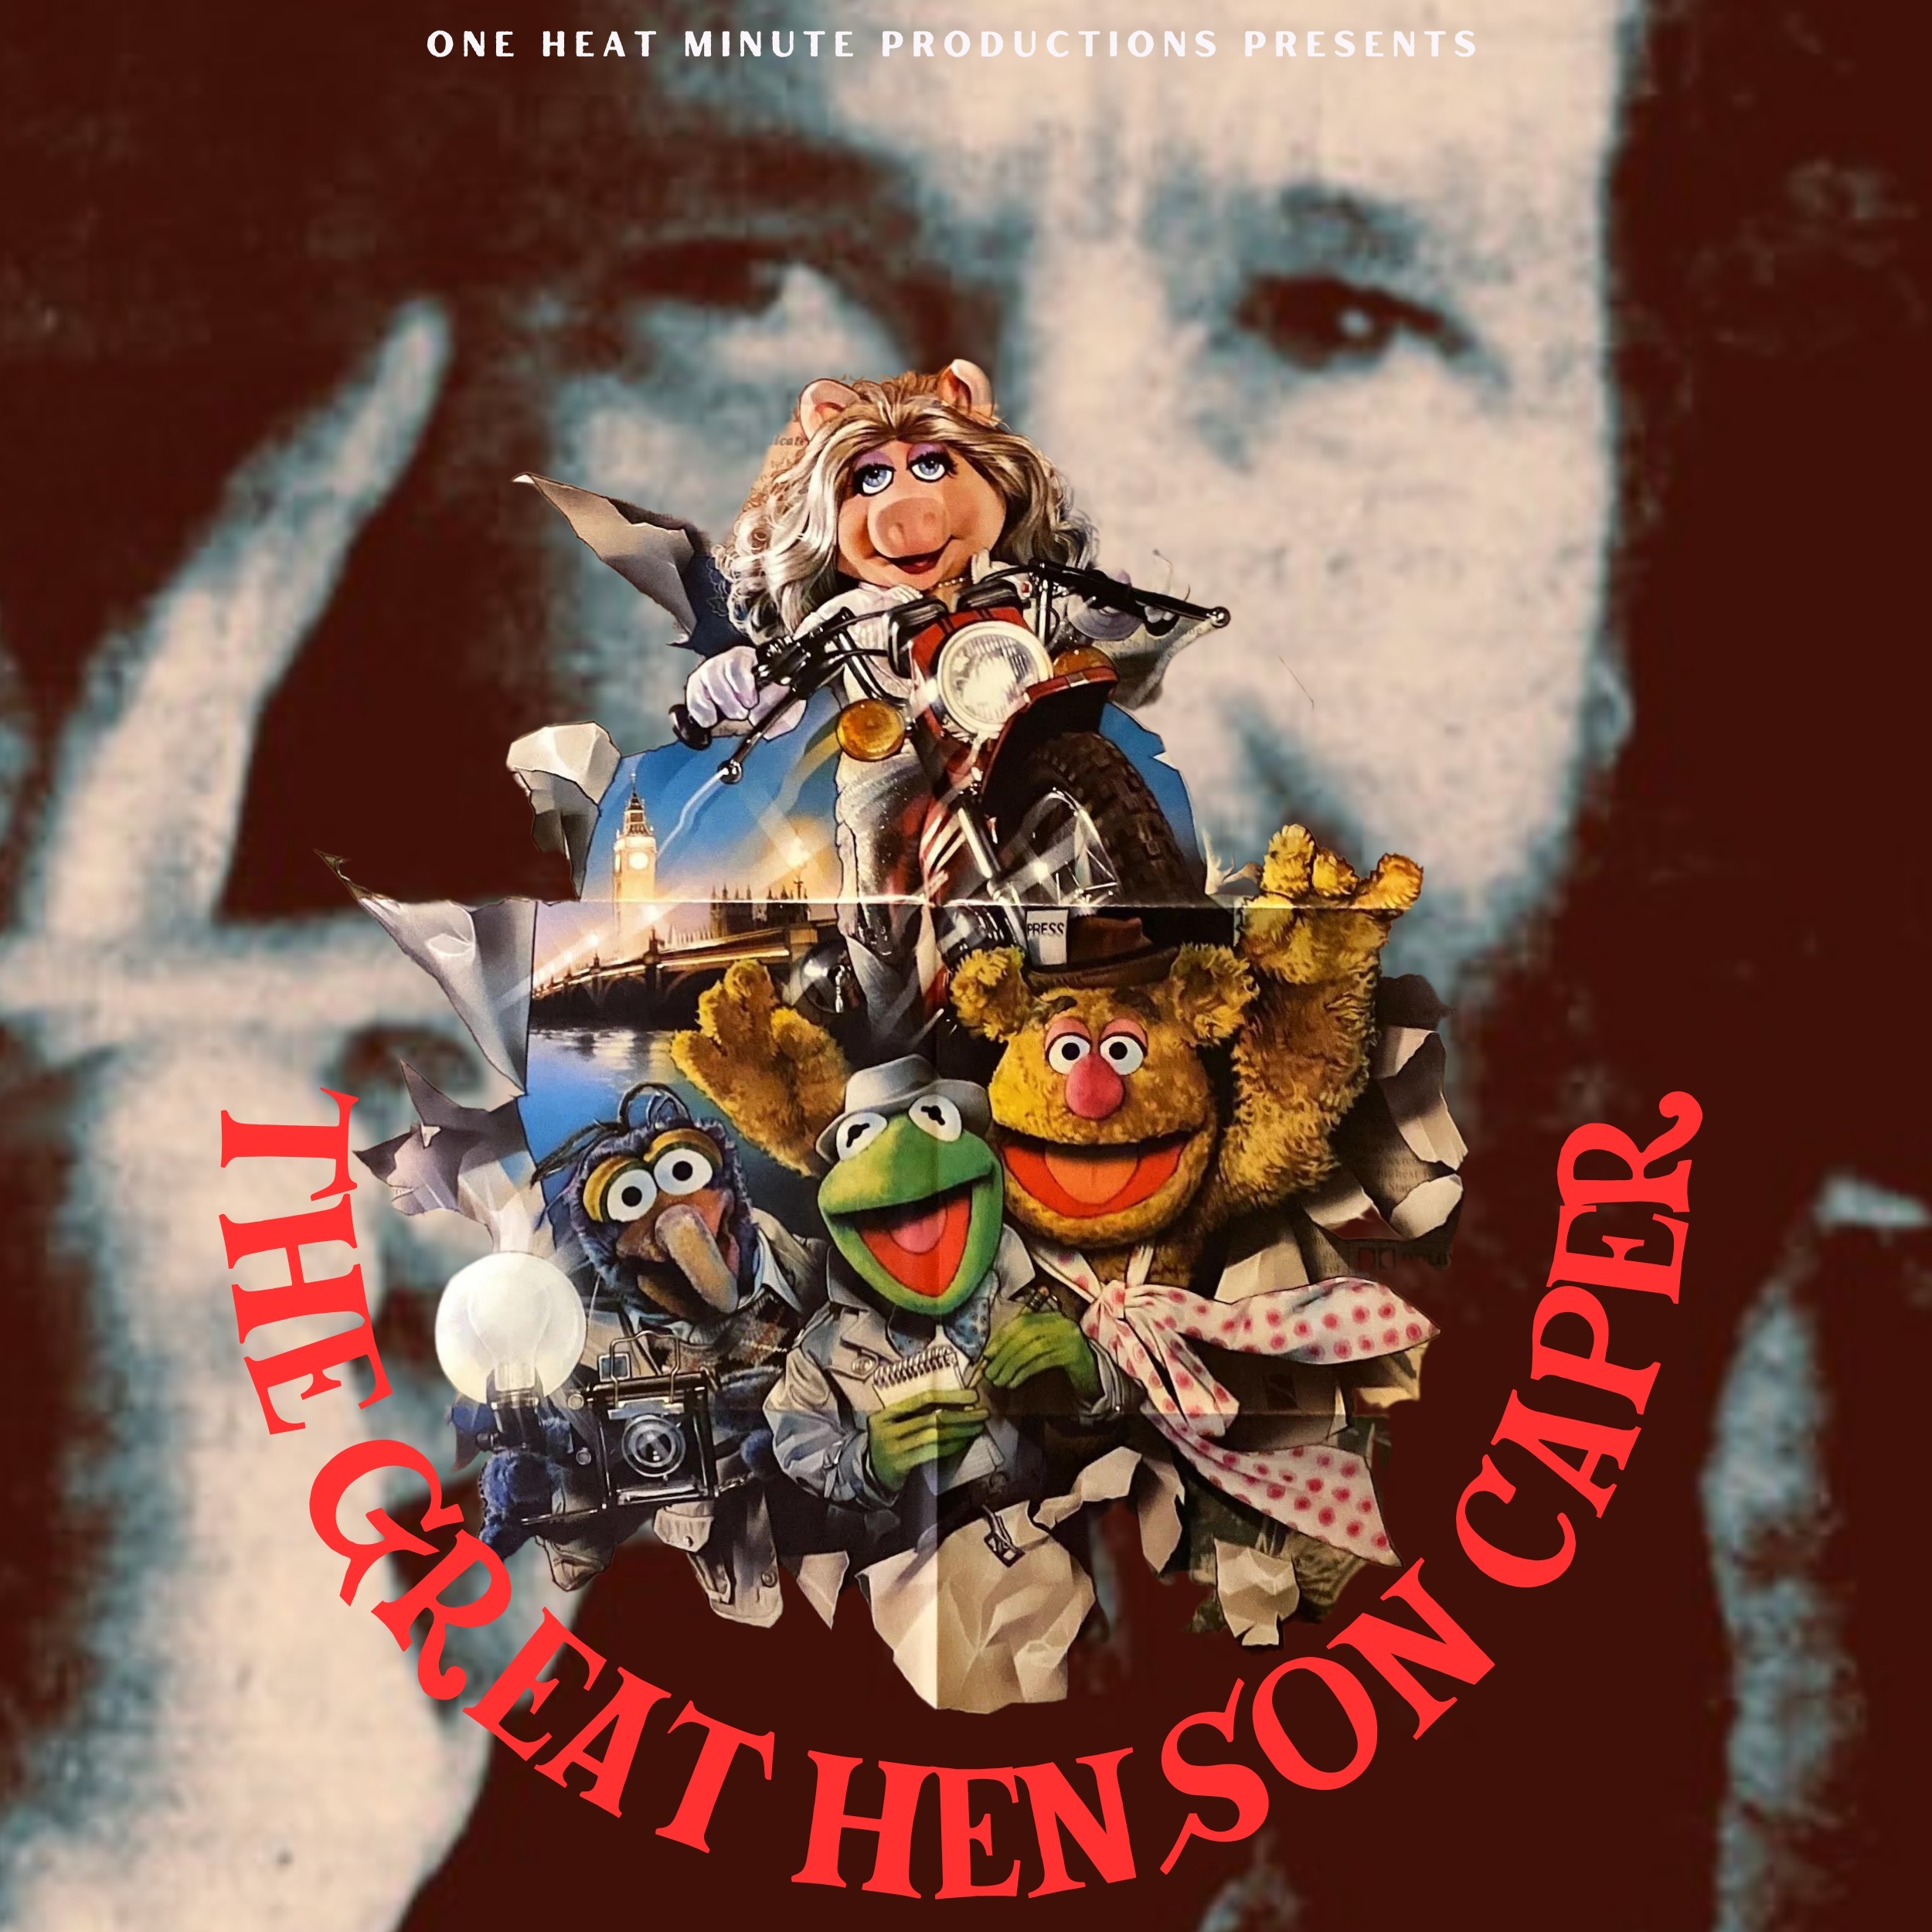 THE GREAT HENSON CAPER PART 9: LABYRINTH